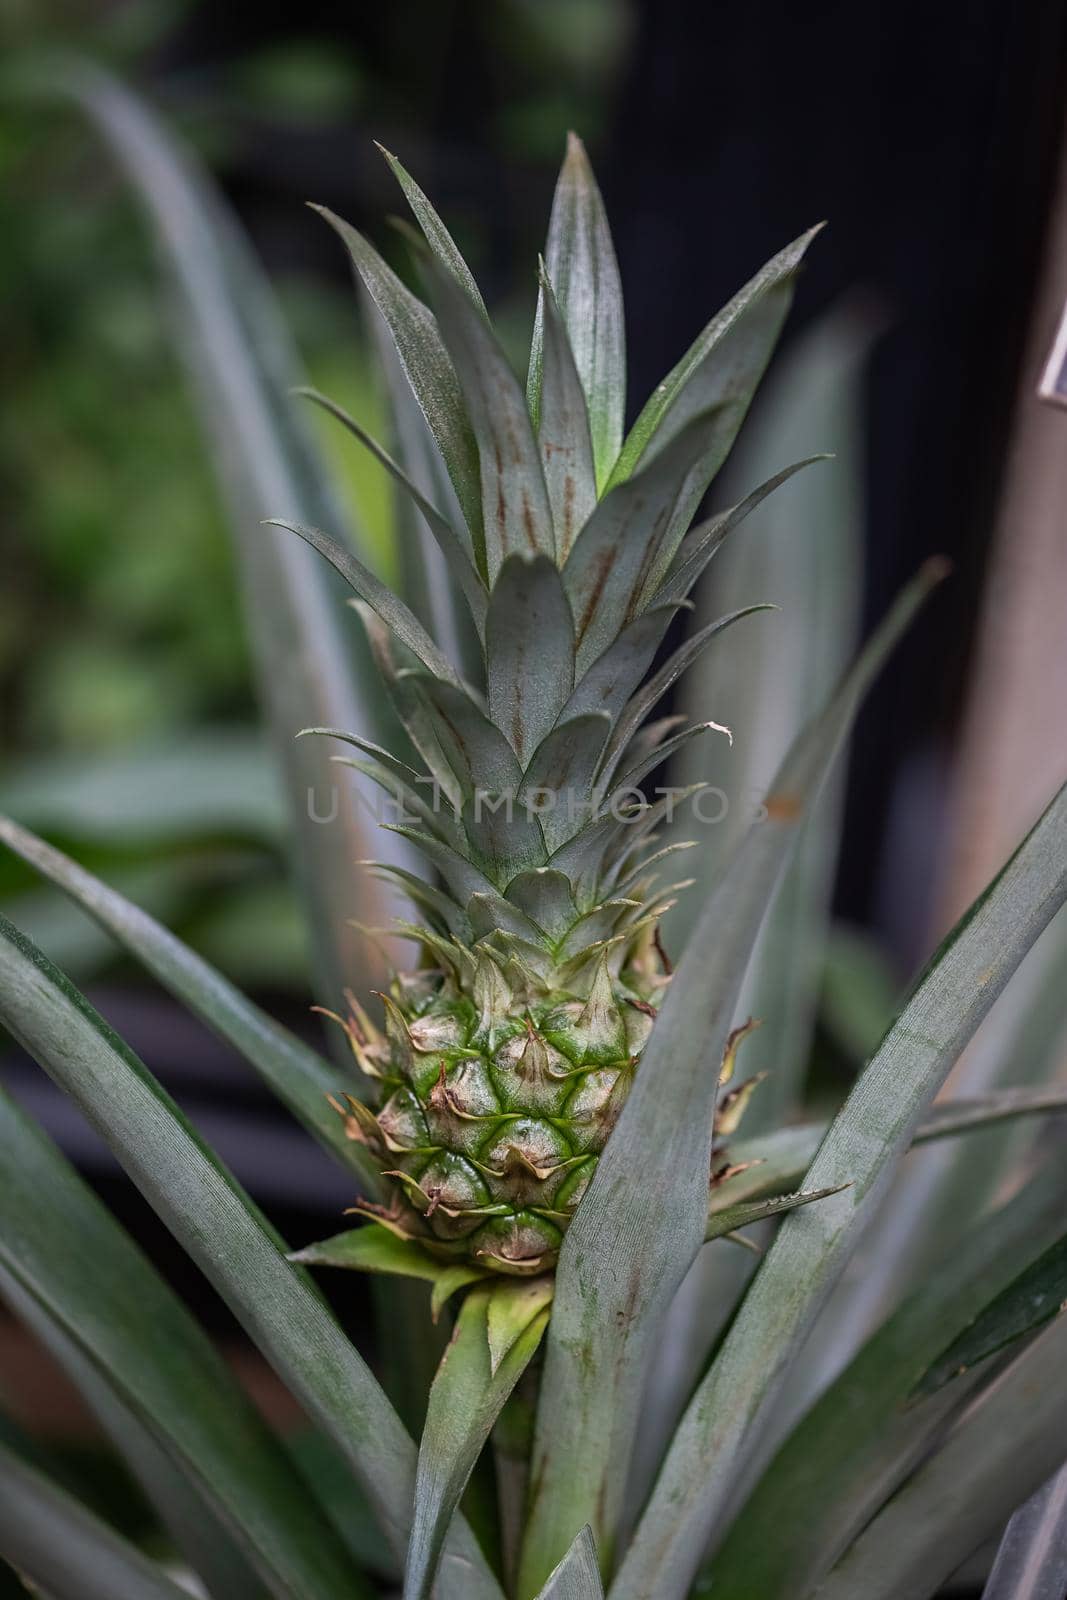 Pineapple tropical fruit growing in in the greenhouse on a blurred background by galinasharapova